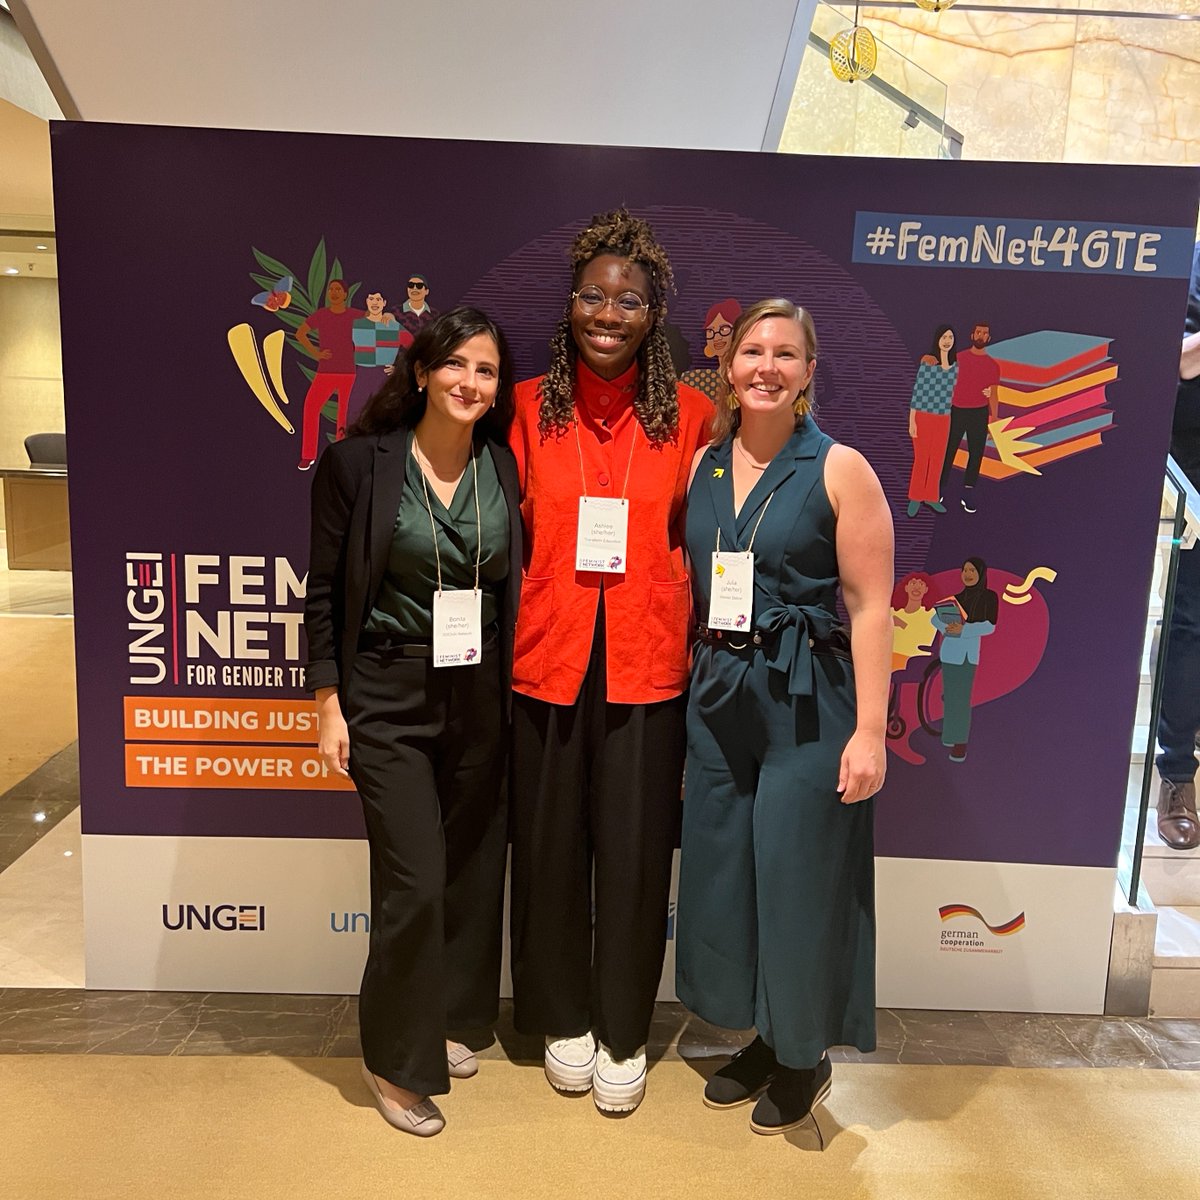 Last week, we joined feminist educators from around the world at #FemNet4GTE in Istanbul, Türkiye, to discuss accelerating progress towards gender transformative education. And we got to hang out with @WomenDeliver Young Leader Alumni @ashleeaburnett & @xbonita7 ❤️ !